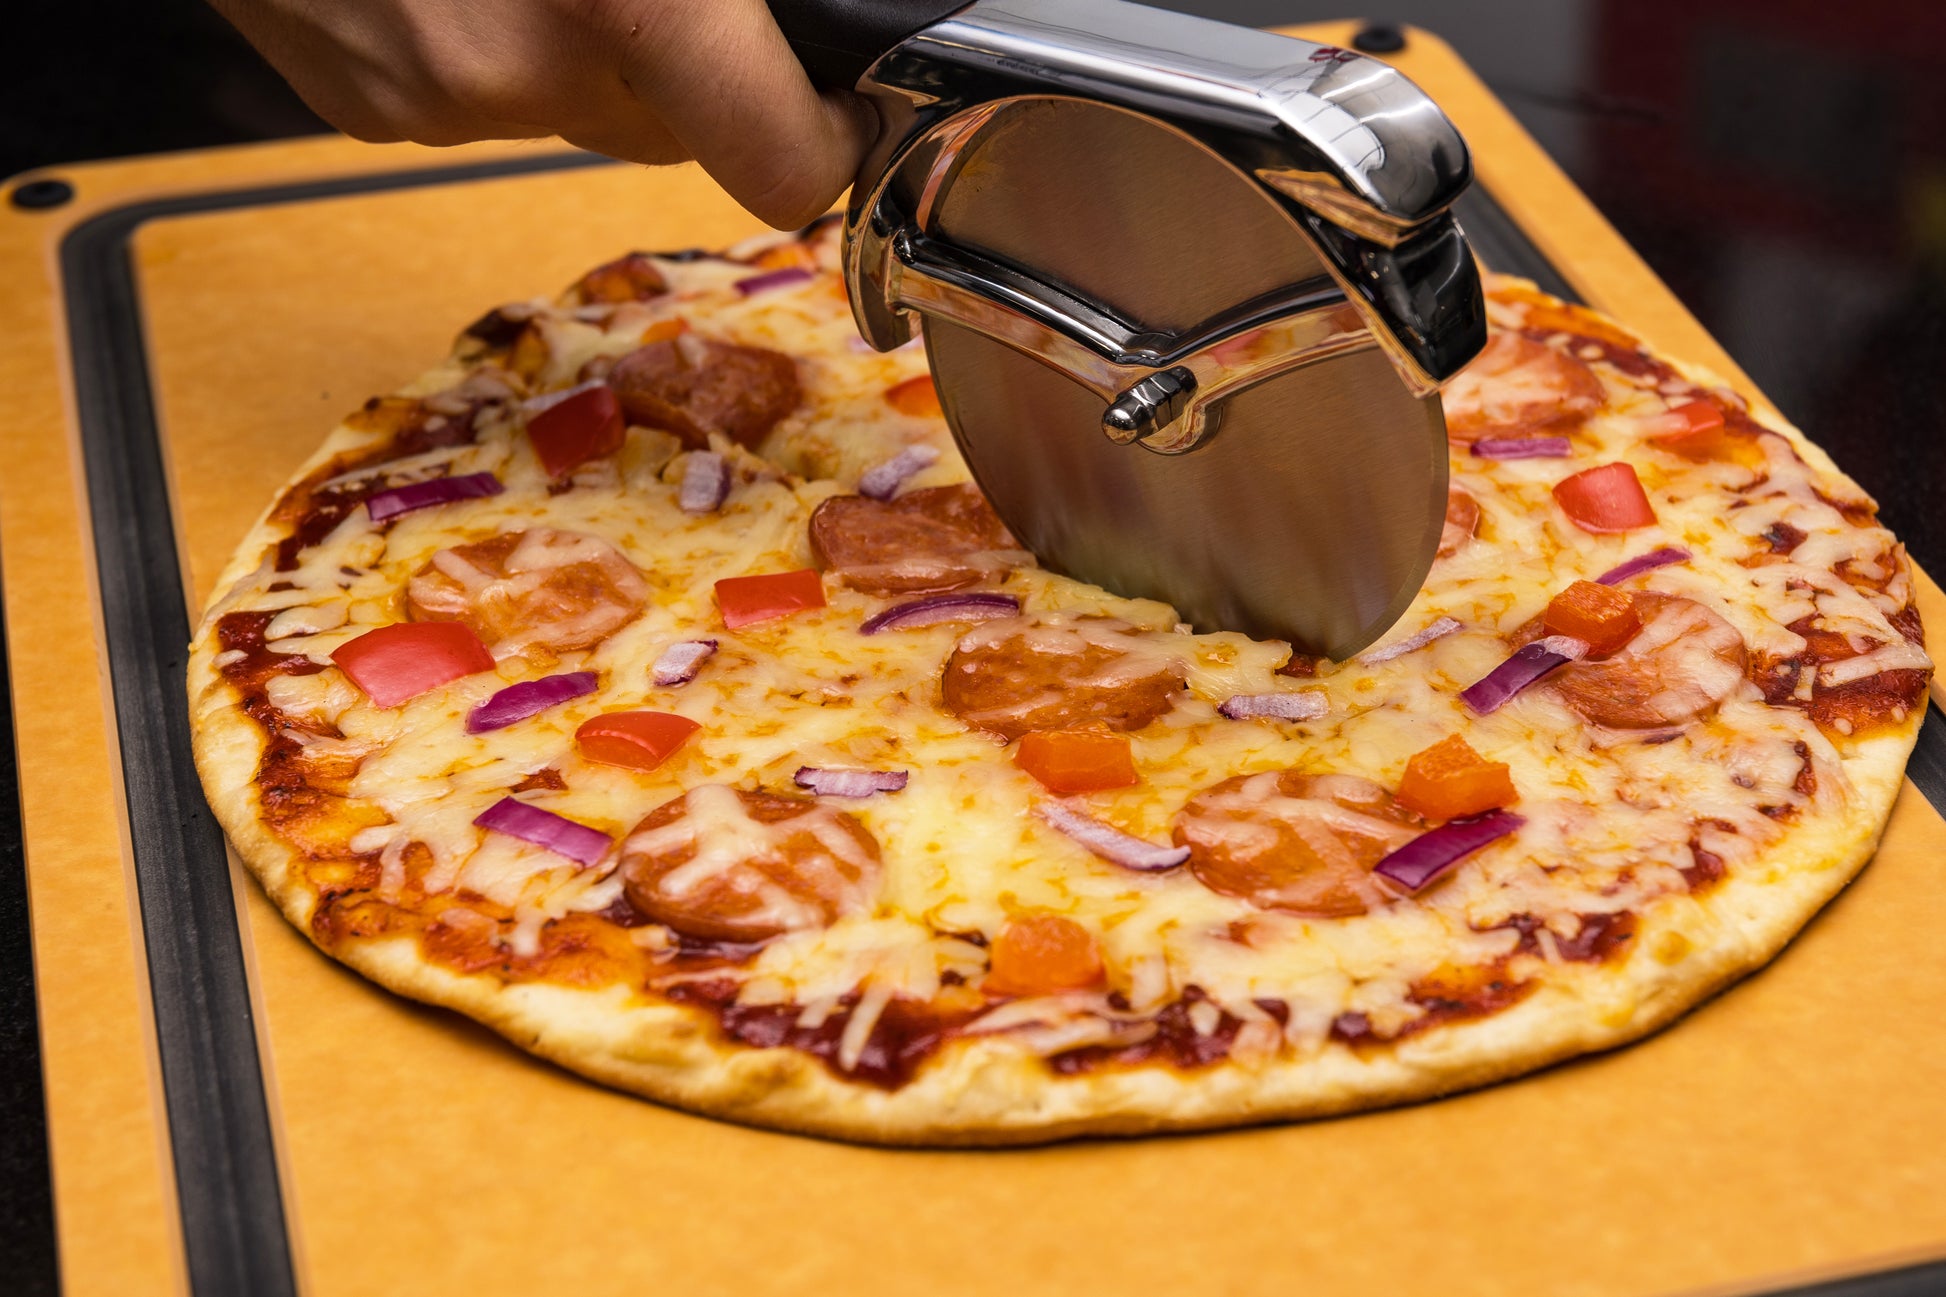 Stainless Steel Pizza Cutter on Pepperoni Pizza- 69810